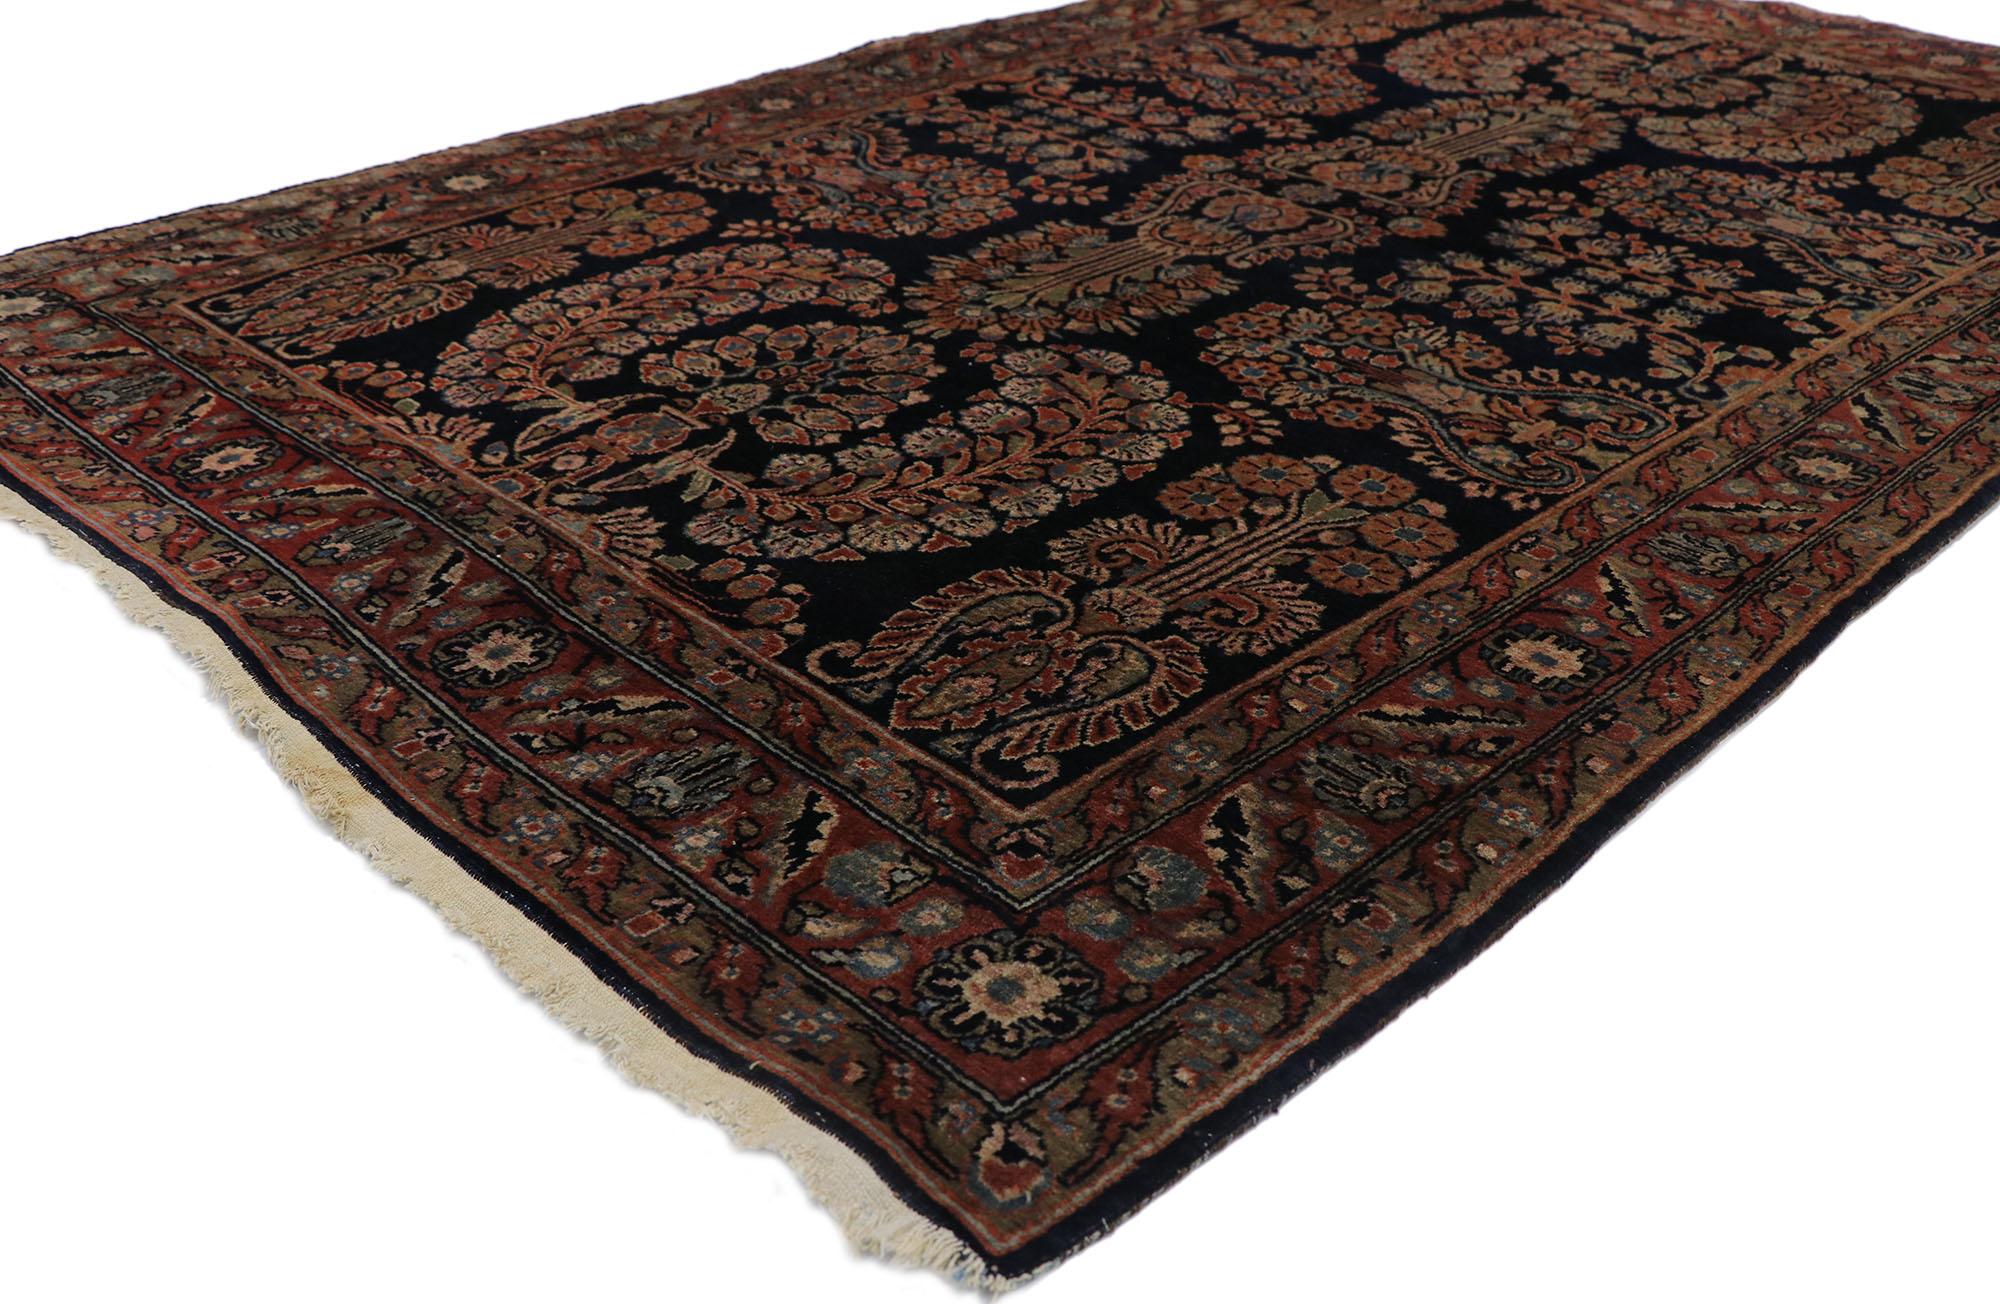 78135 Antique Persian Sarouk rug, 04'04 x 06'09?. ?Displaying an impressive array of floral elements with incredible detail and texture, this hand knotted antique Persian Sarouk rug is a captivating vision of woven beauty. The timeless design and